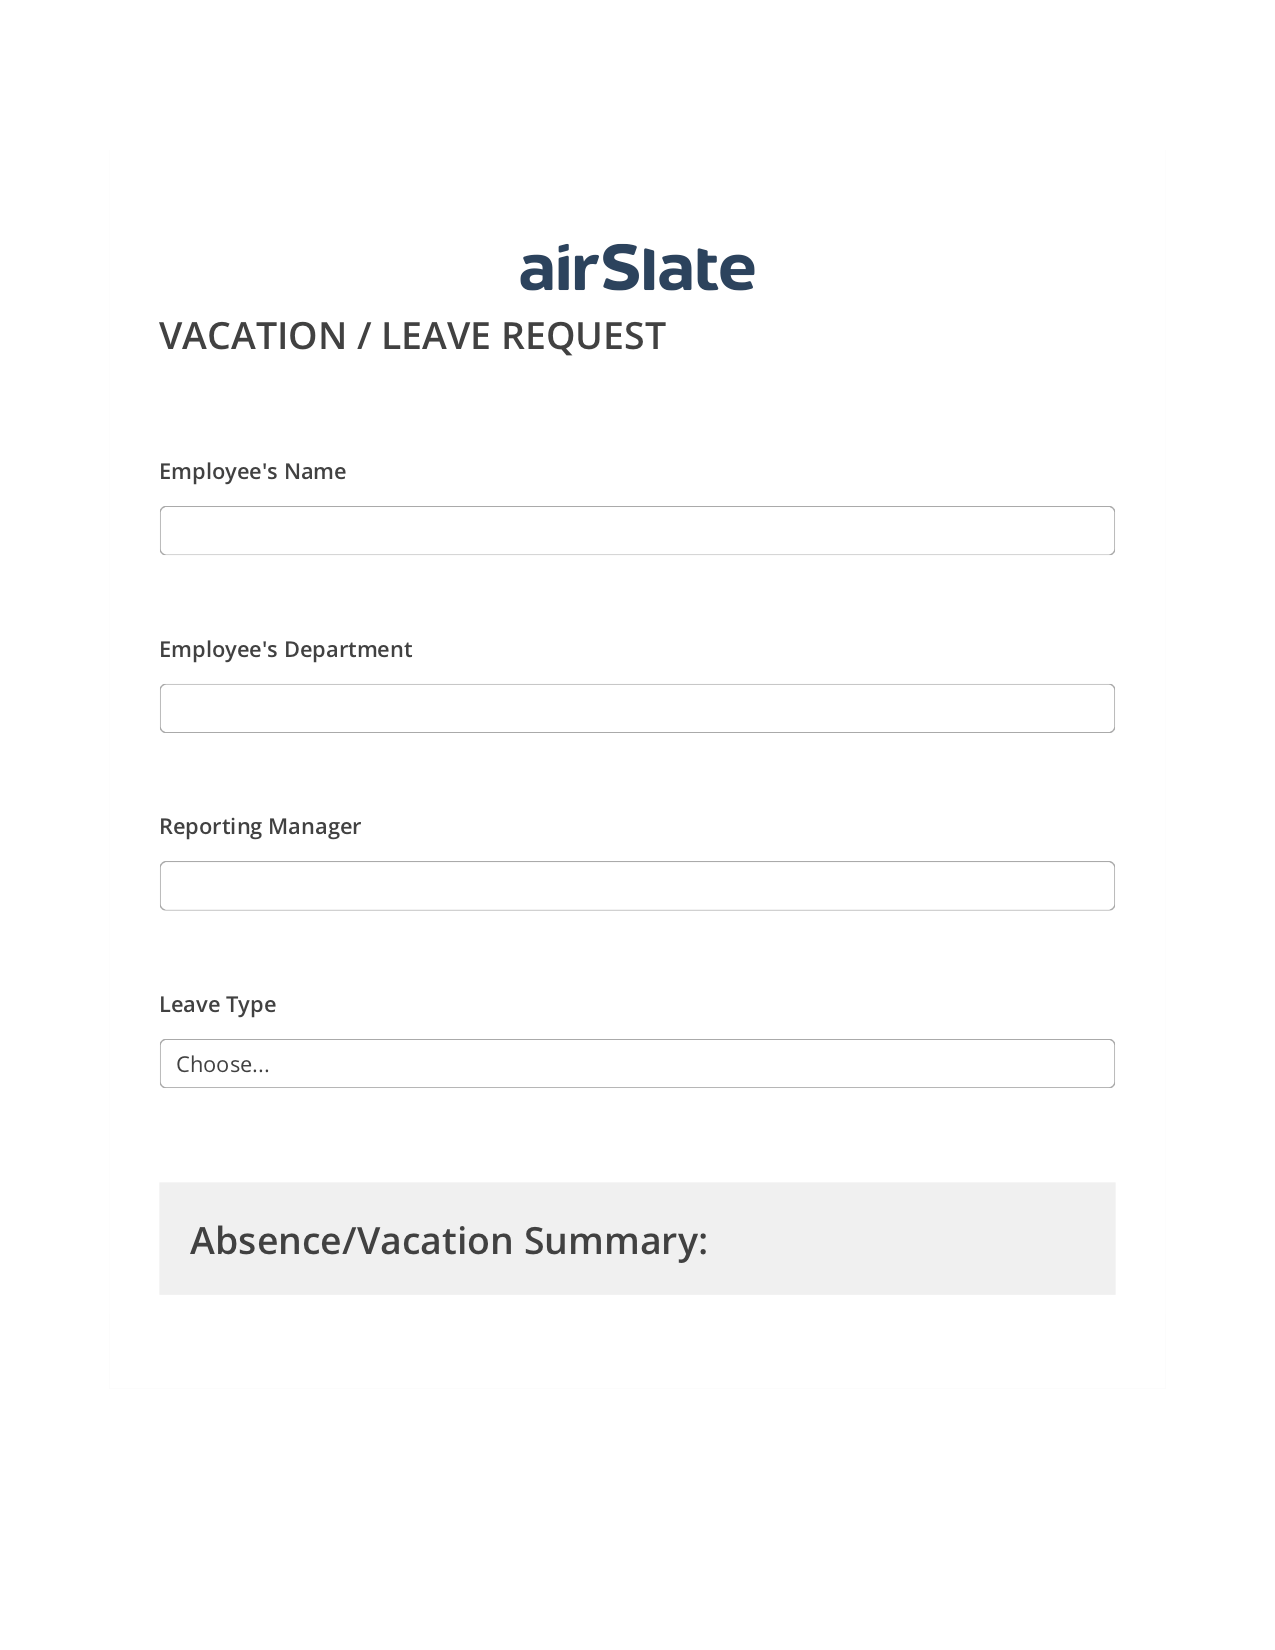 Vacation/Leave Request Workflow Prefill from NetSuite records, Send a Slate to MS Dynamics 365 Contact Bot, Webhook Postfinish Bot